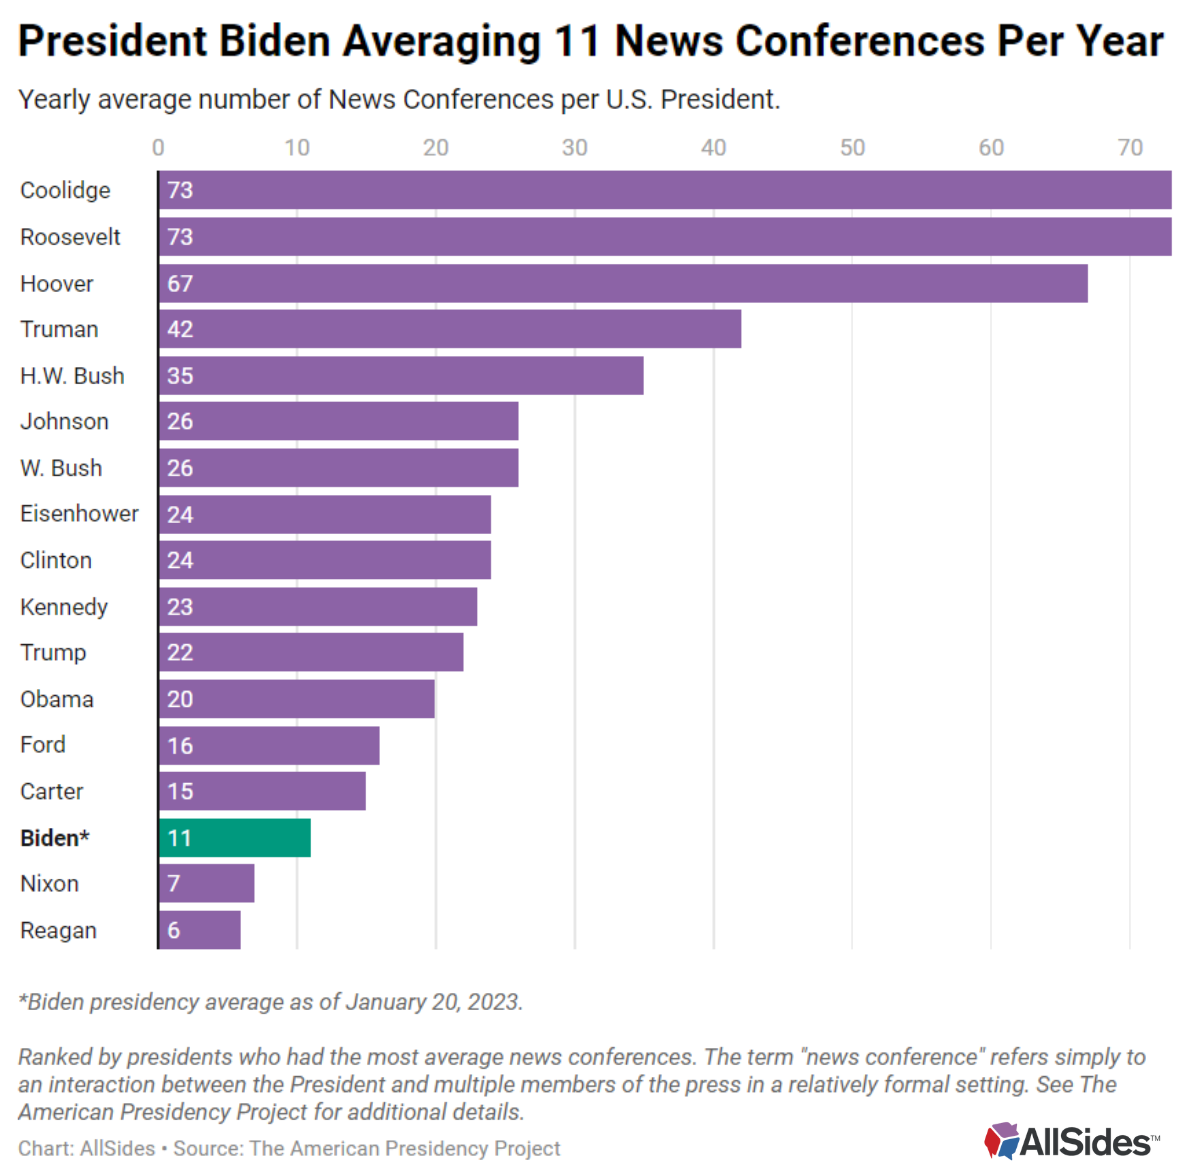 Chart showing news conferences